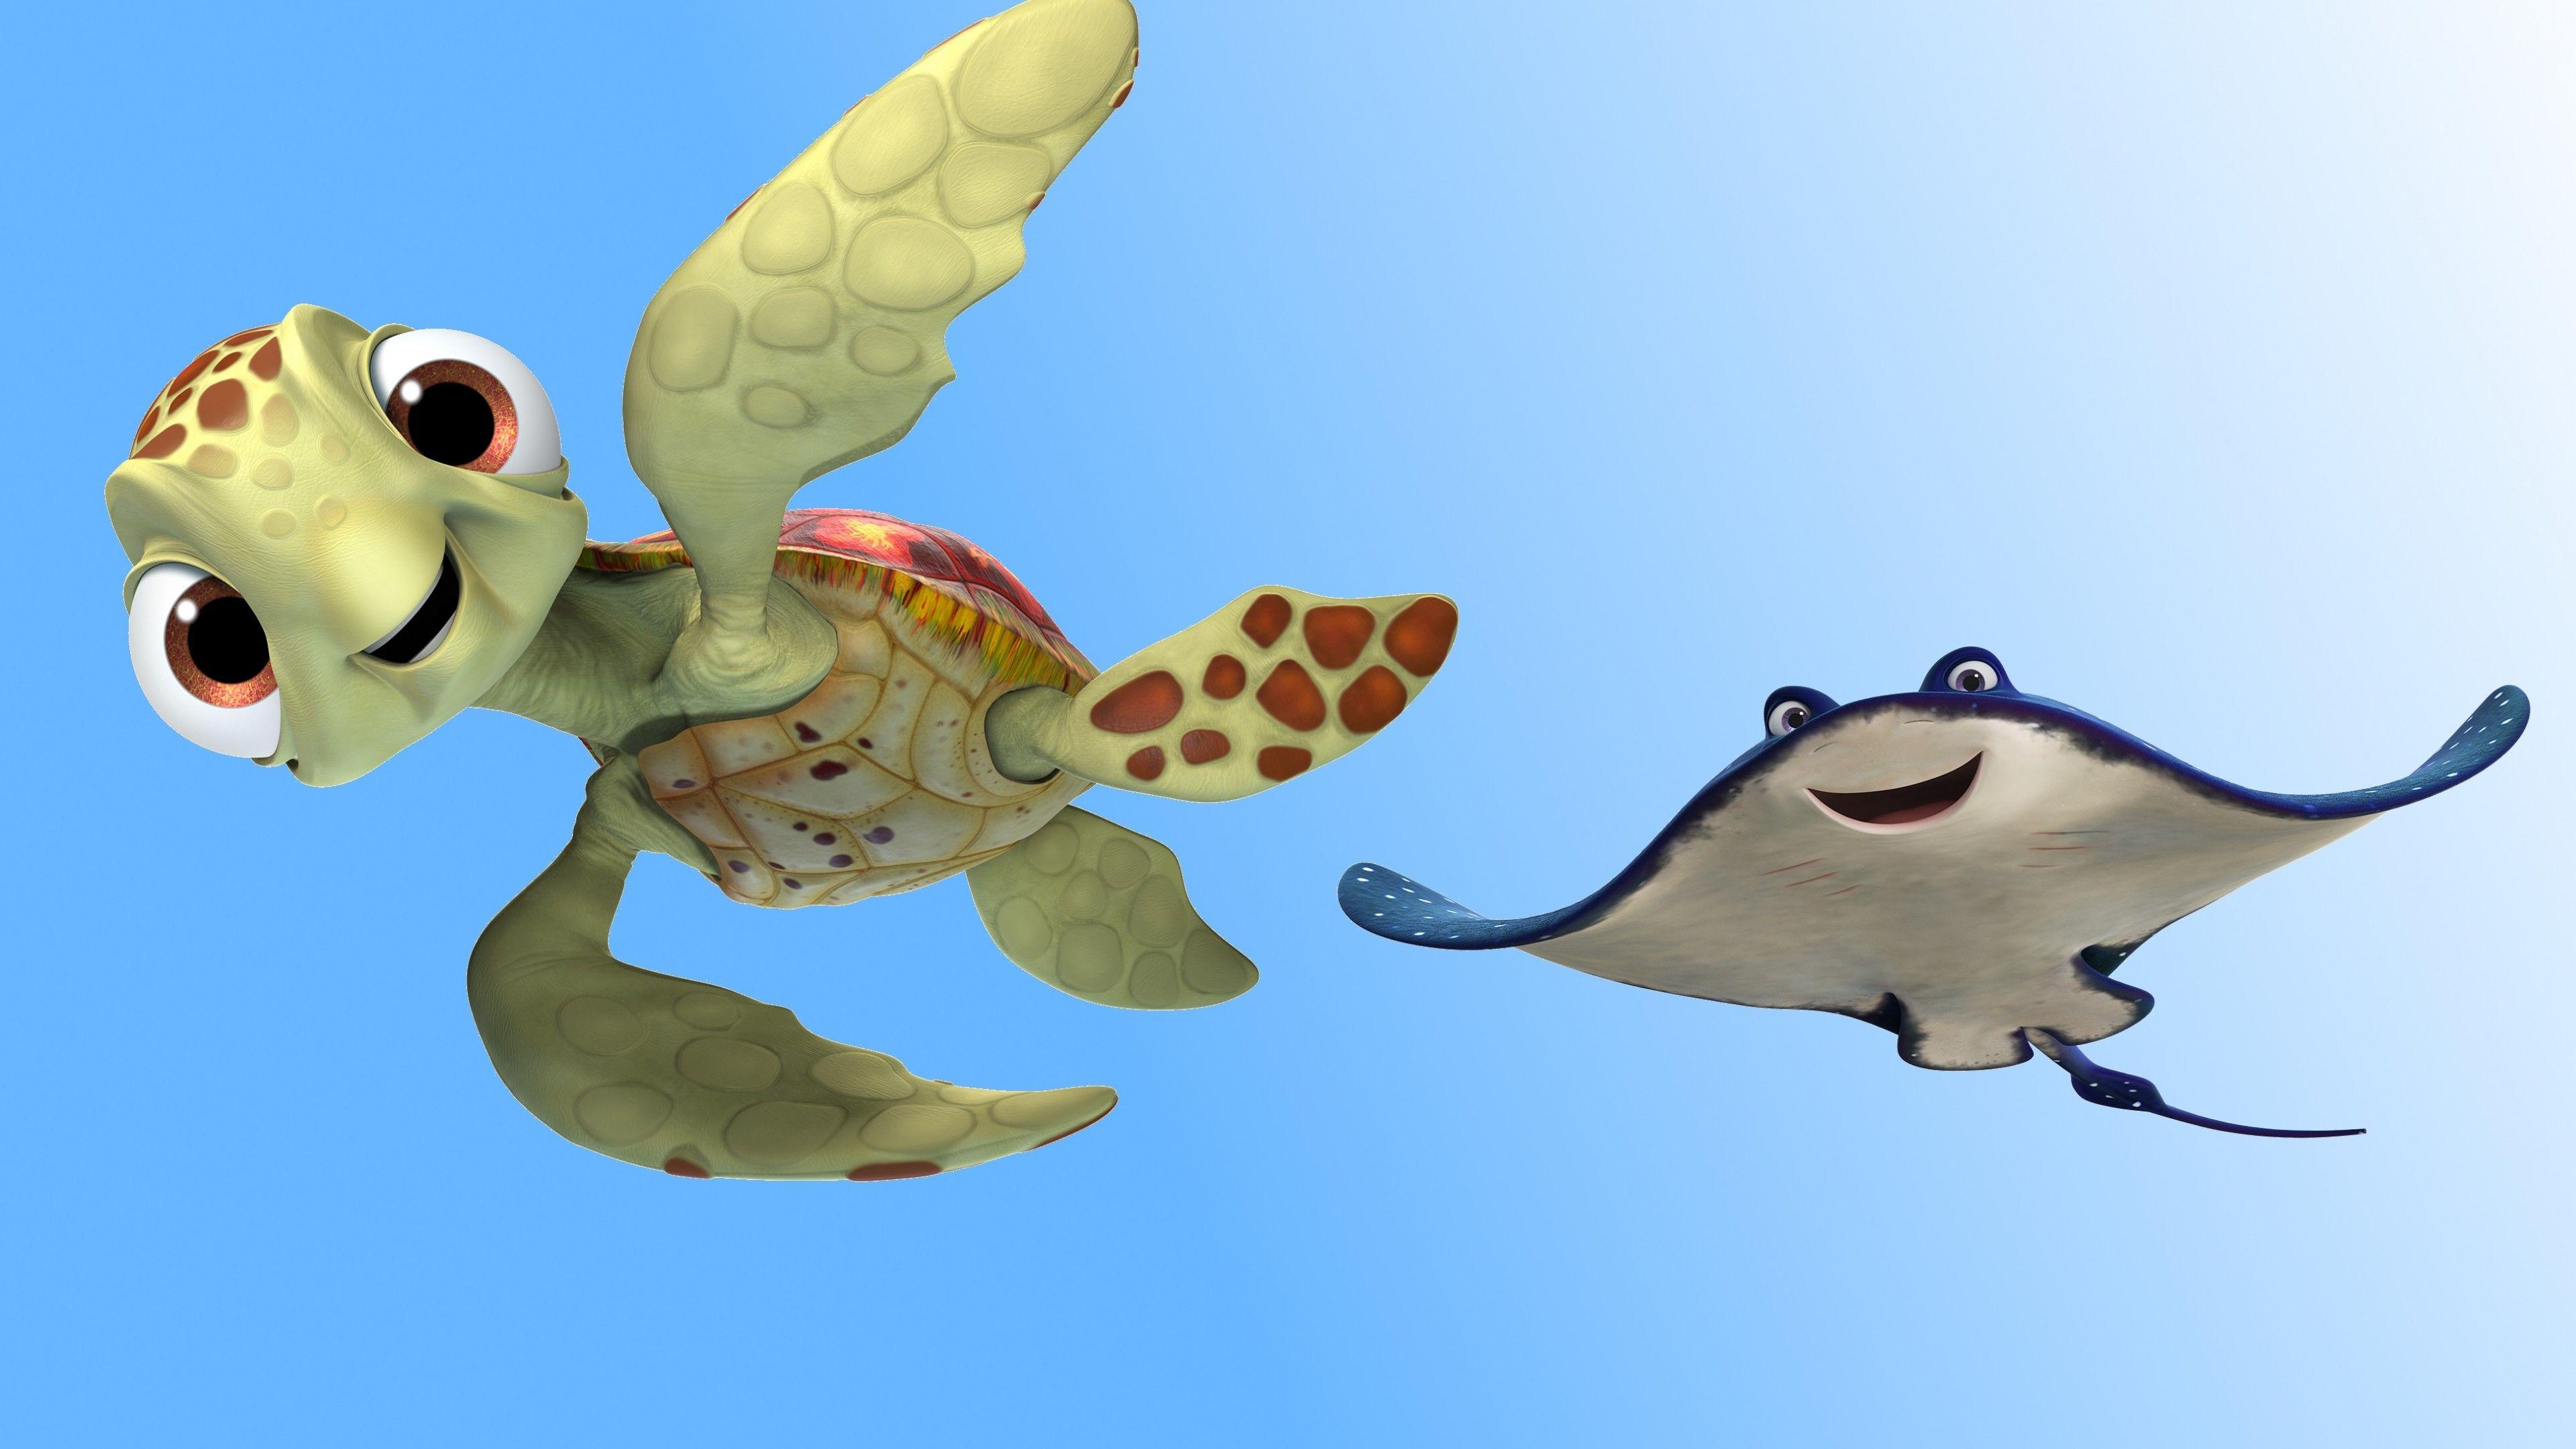 Animated Turtle Wallpapers - Top Free Animated Turtle Backgrounds